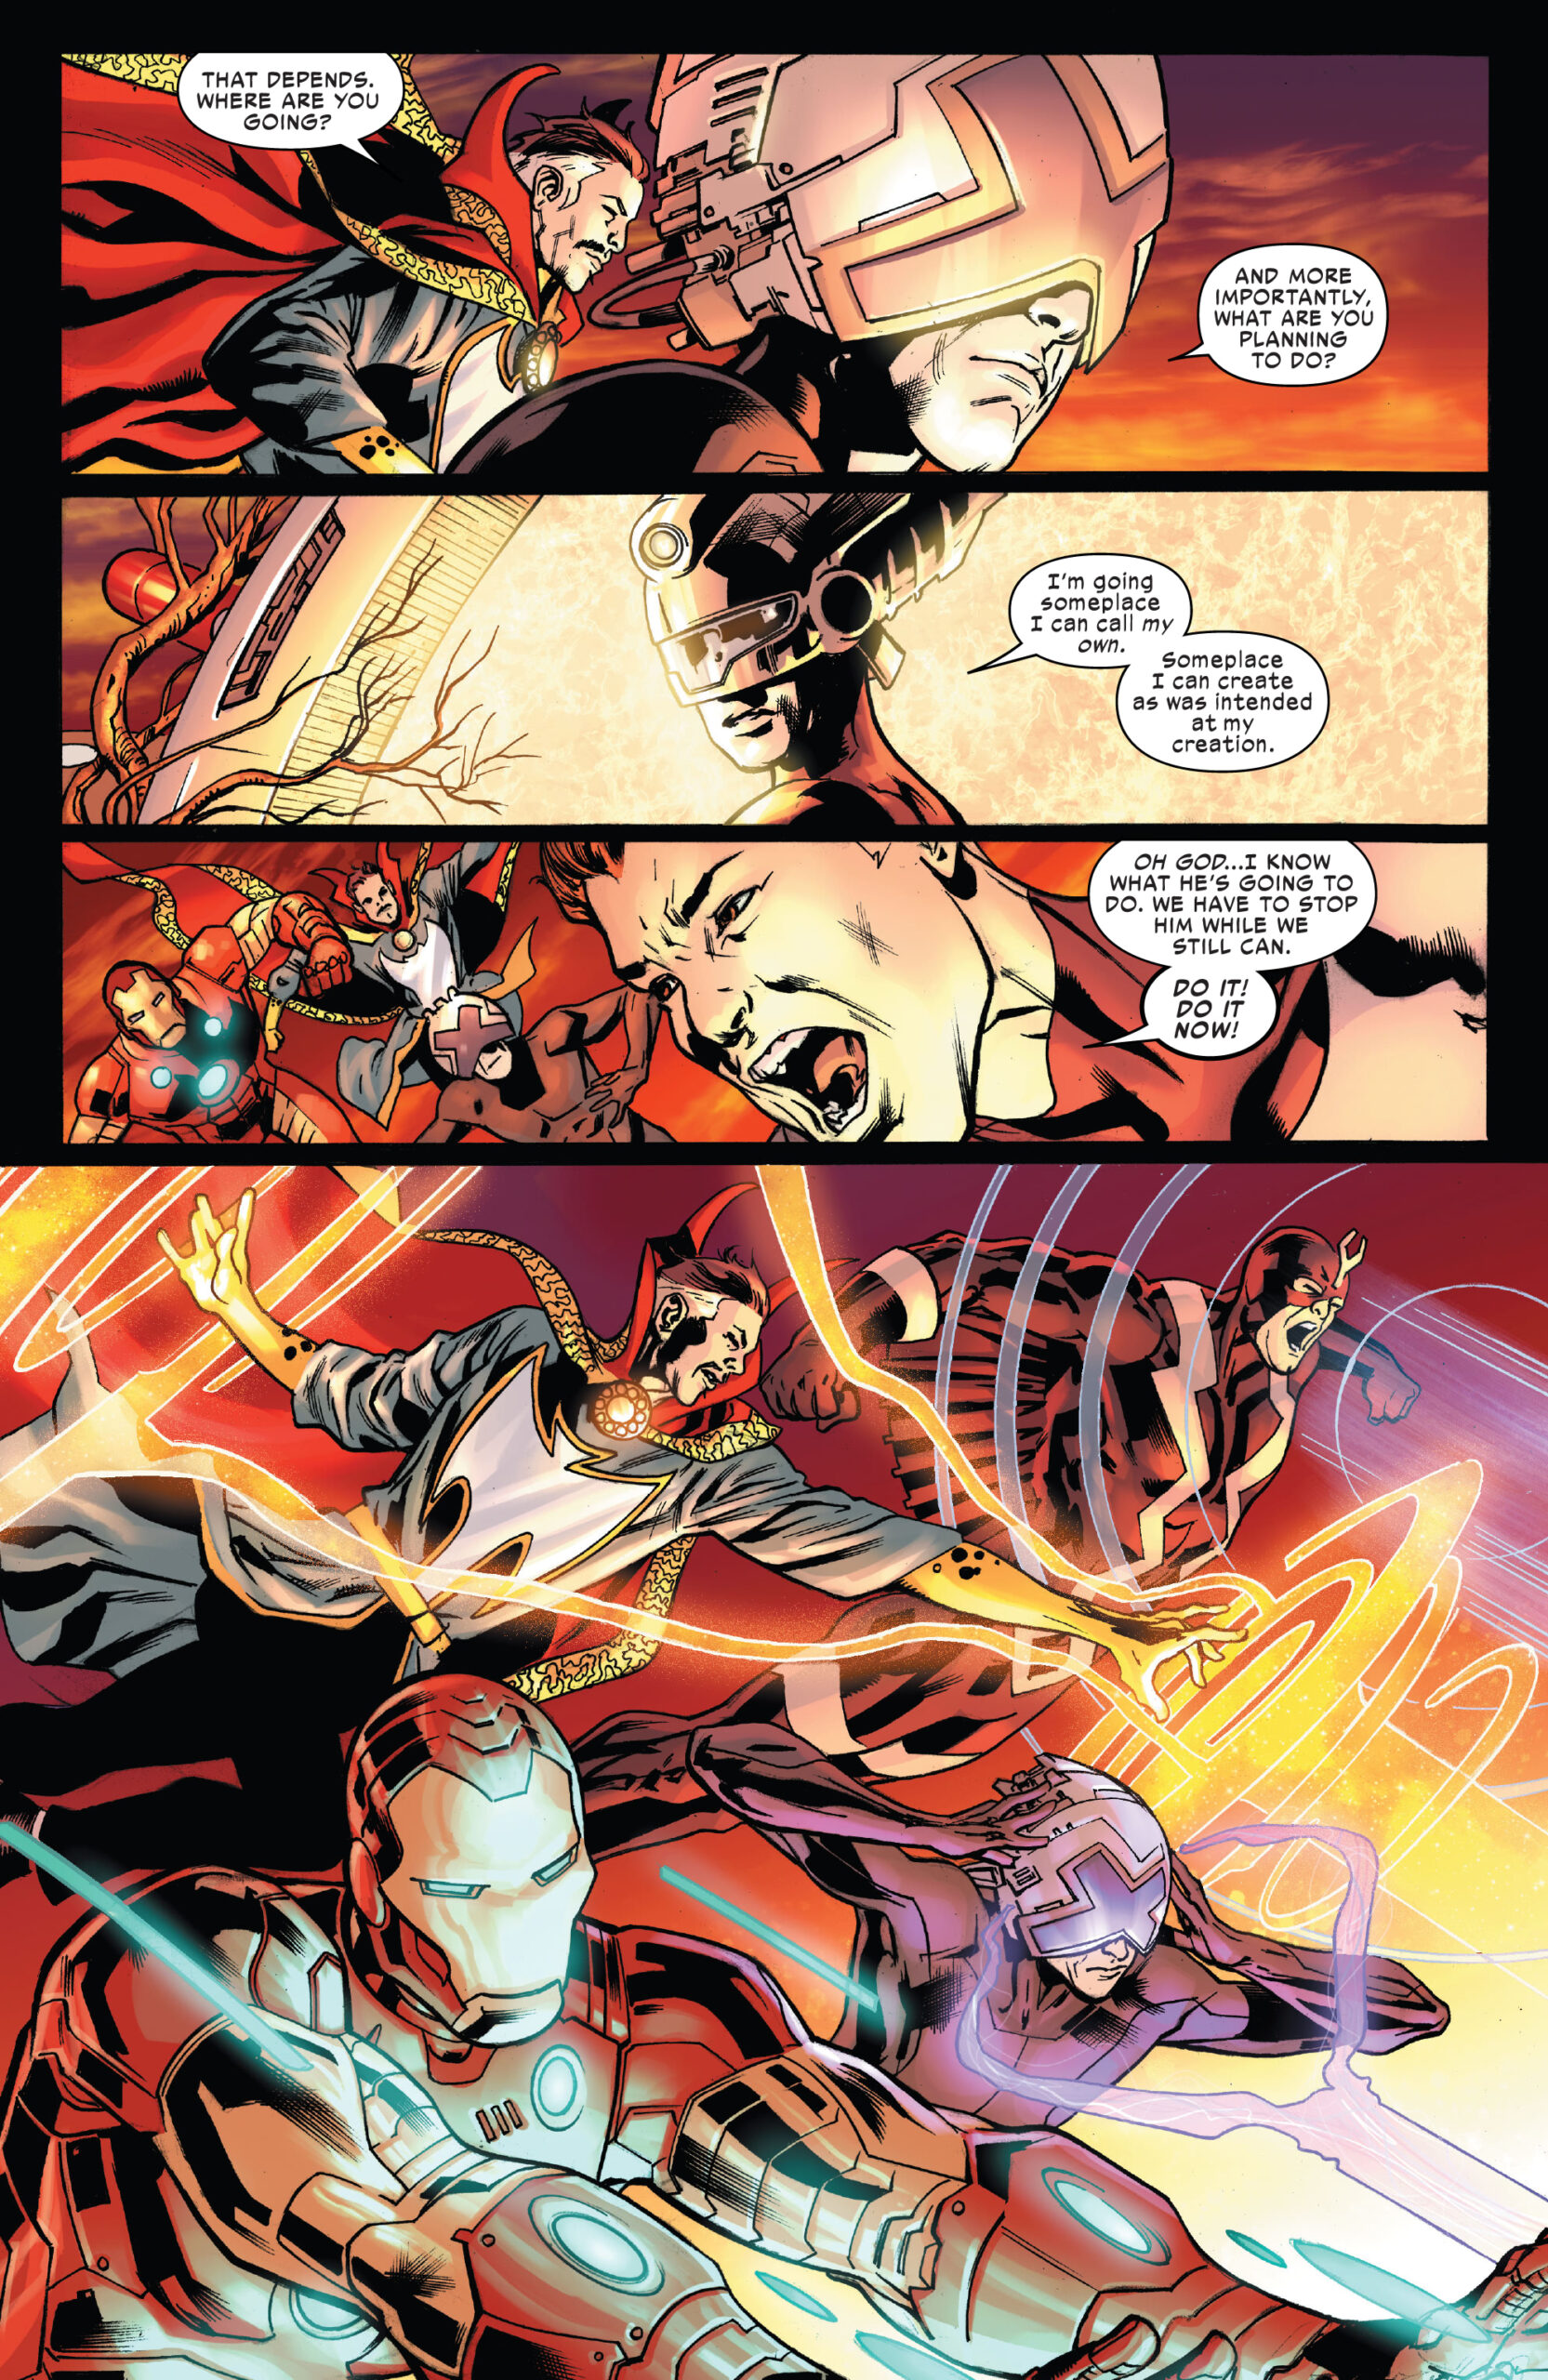 The Illuminati confronts The Maker in Ultimate Invasion Vol. 1 #1 "Chapter One: Good Artists Copy" (2023), Marvel Comics. Words by Jonathan Hickman, art by Bryan Hitch, Andrew Currie, Alex Sinclair, and Joe Caramagna.